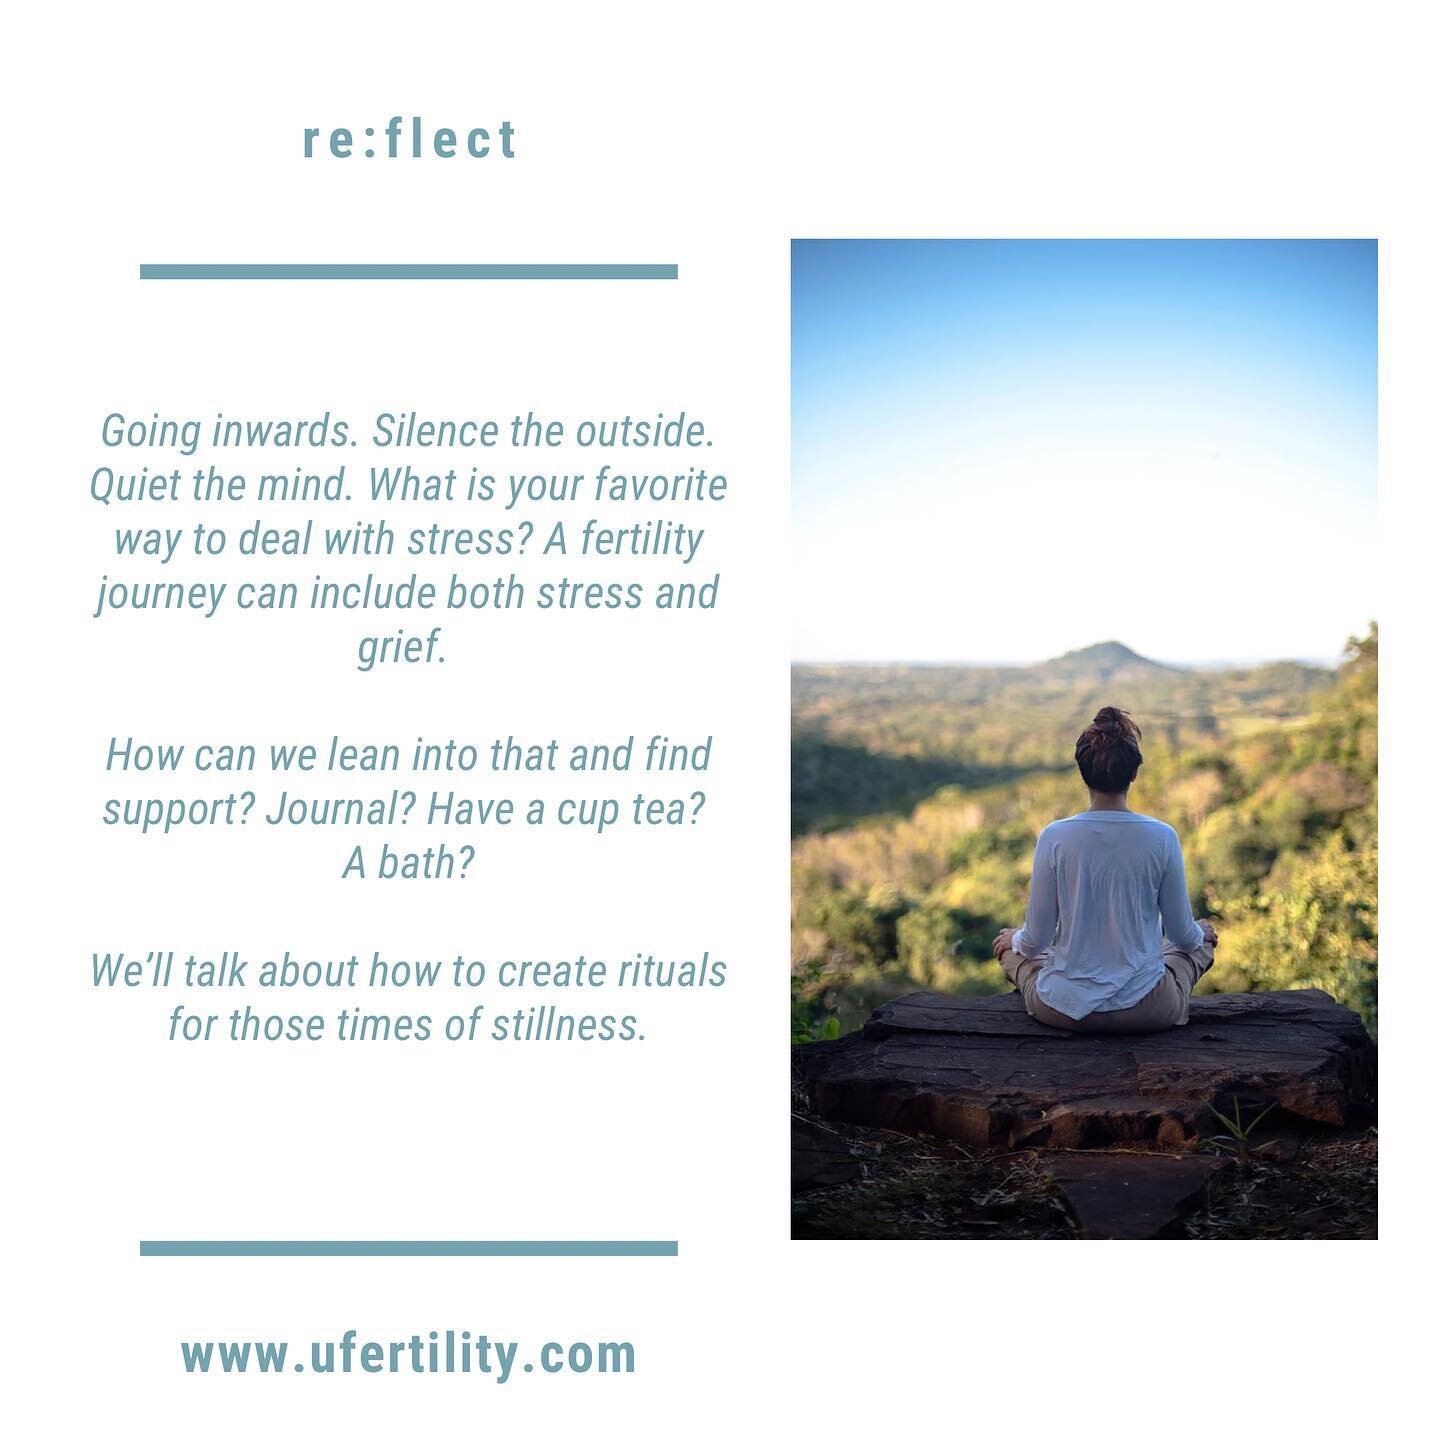 Going inwards. Silence the outside. Quiet the mind. What is your favorite way to deal with stress? A fertility journey can include both stress and grief. How can we lean into that and find support? Journal? Have a cup tea? A bath? 

We&rsquo;ll talk 